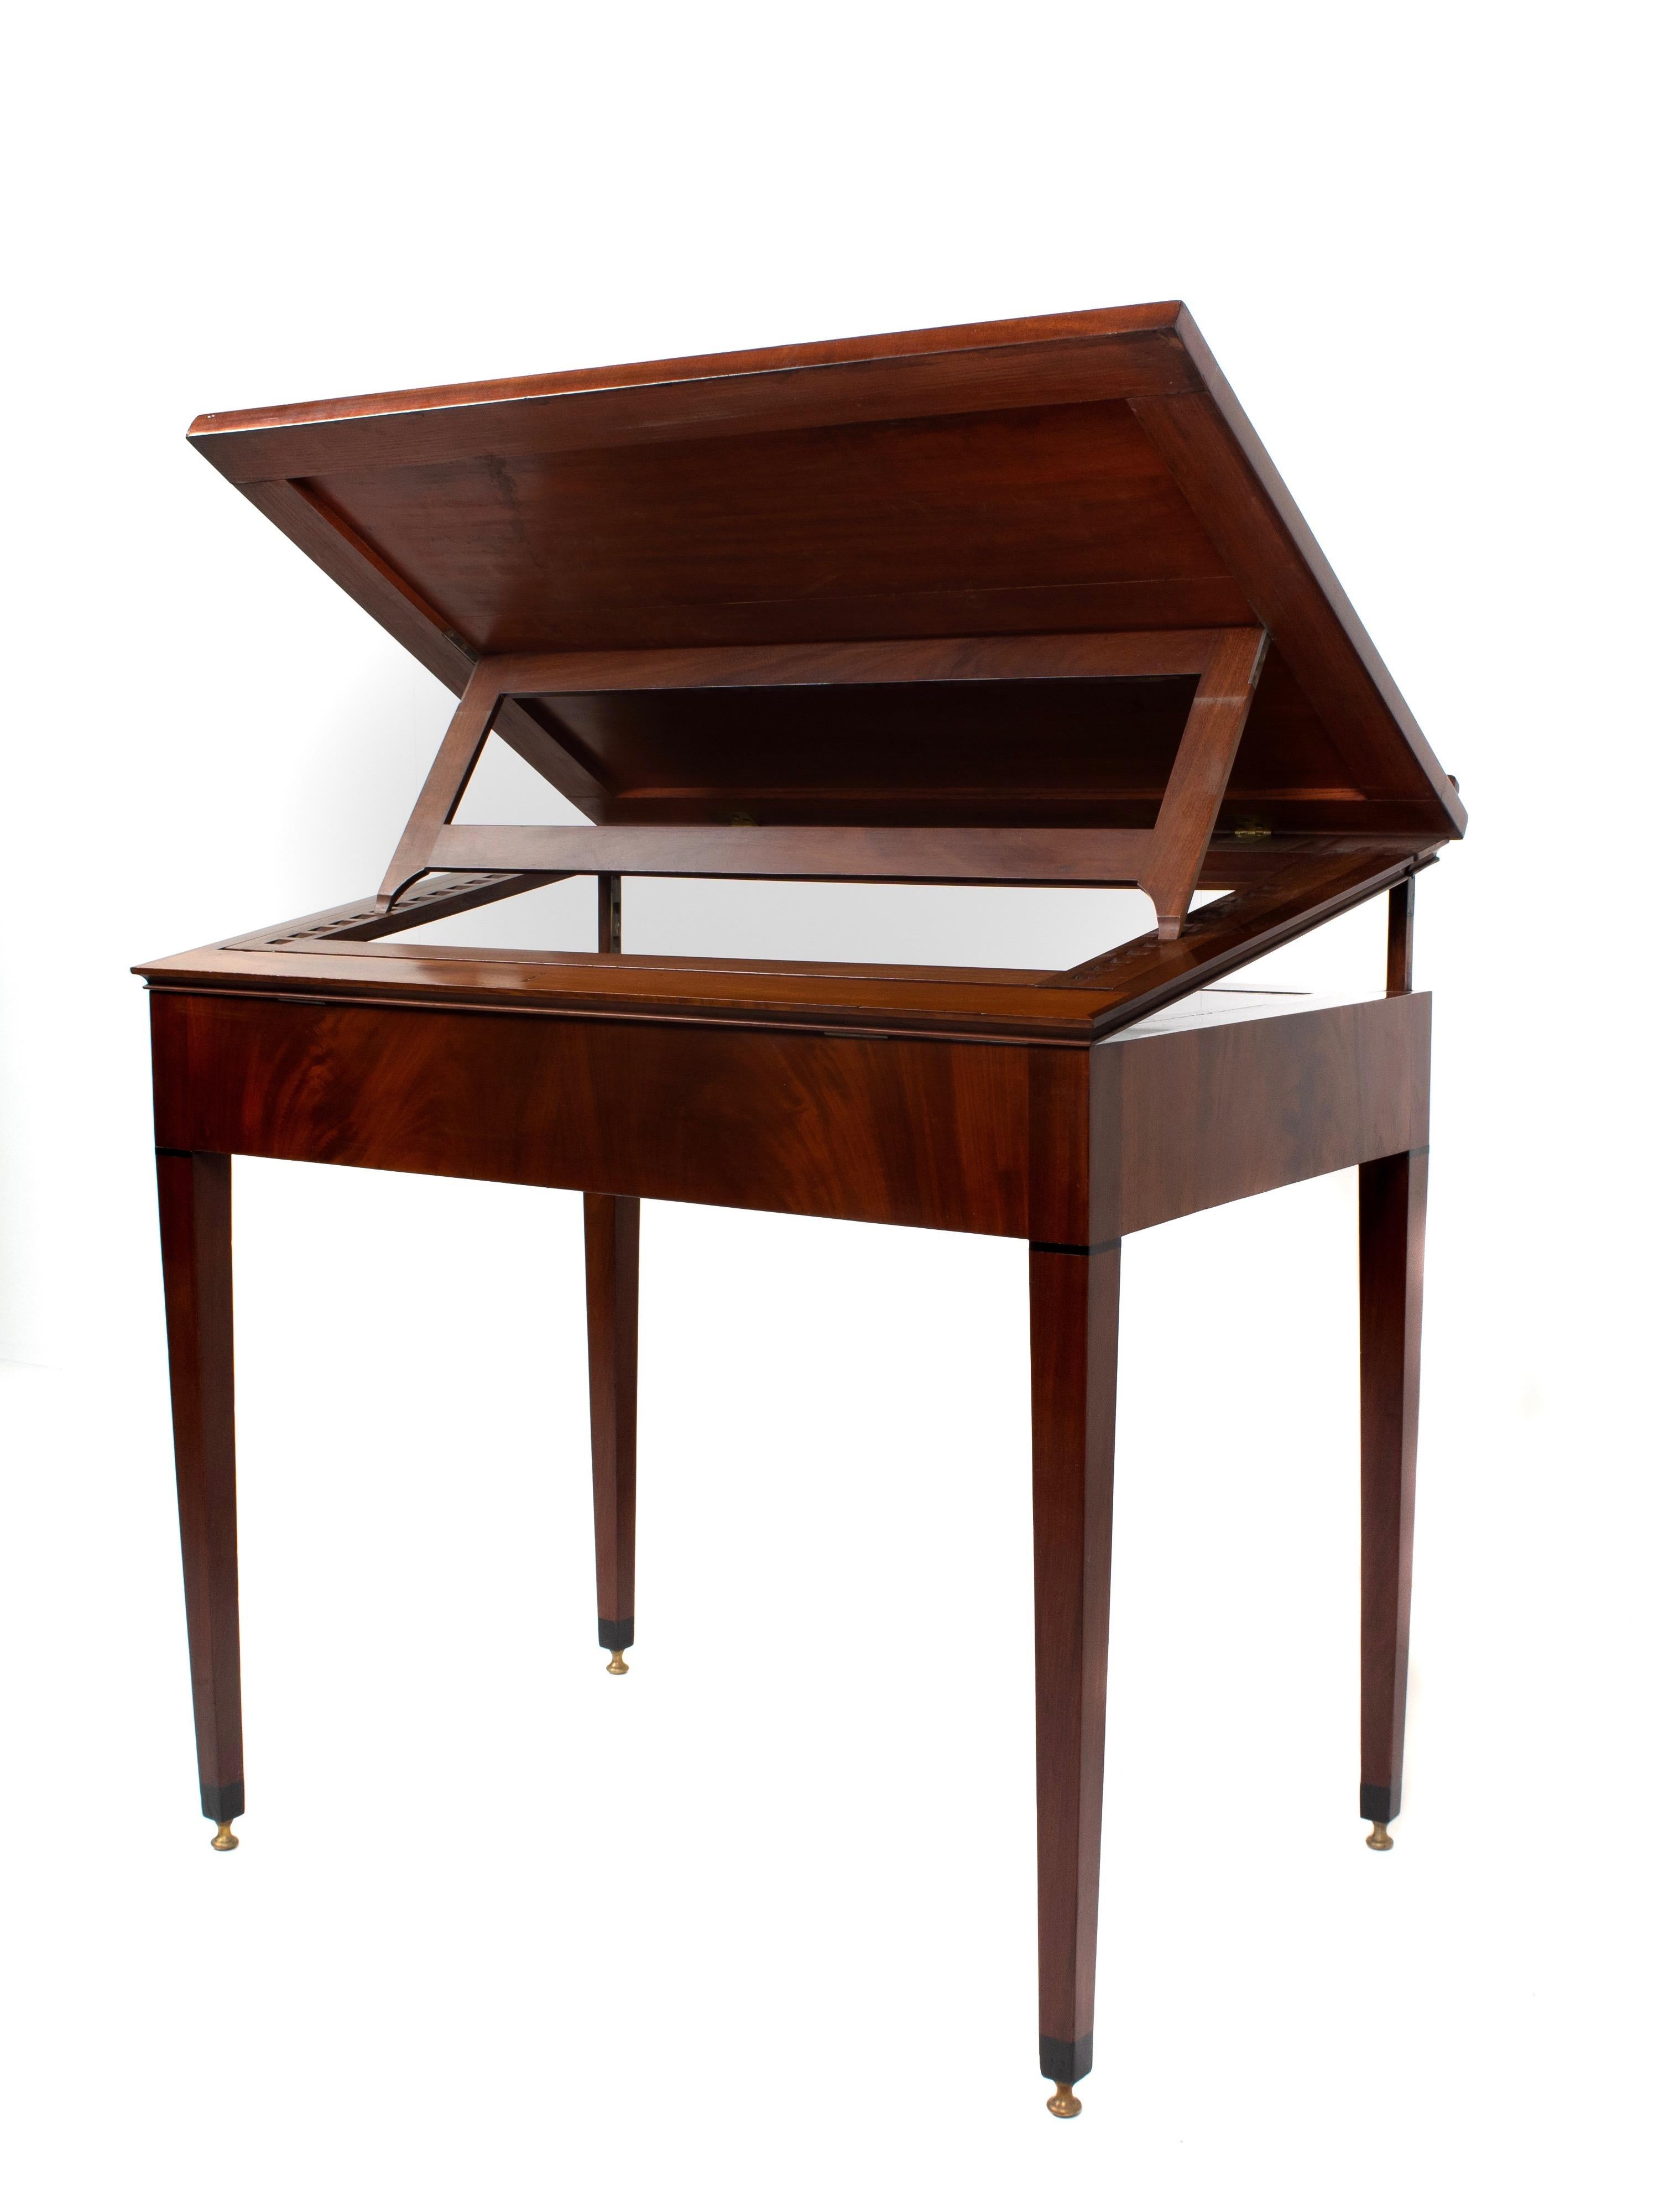 Early 19th Century Mahogany Architects Table by Jean-Joseph Chapuis, 1810 For Sale